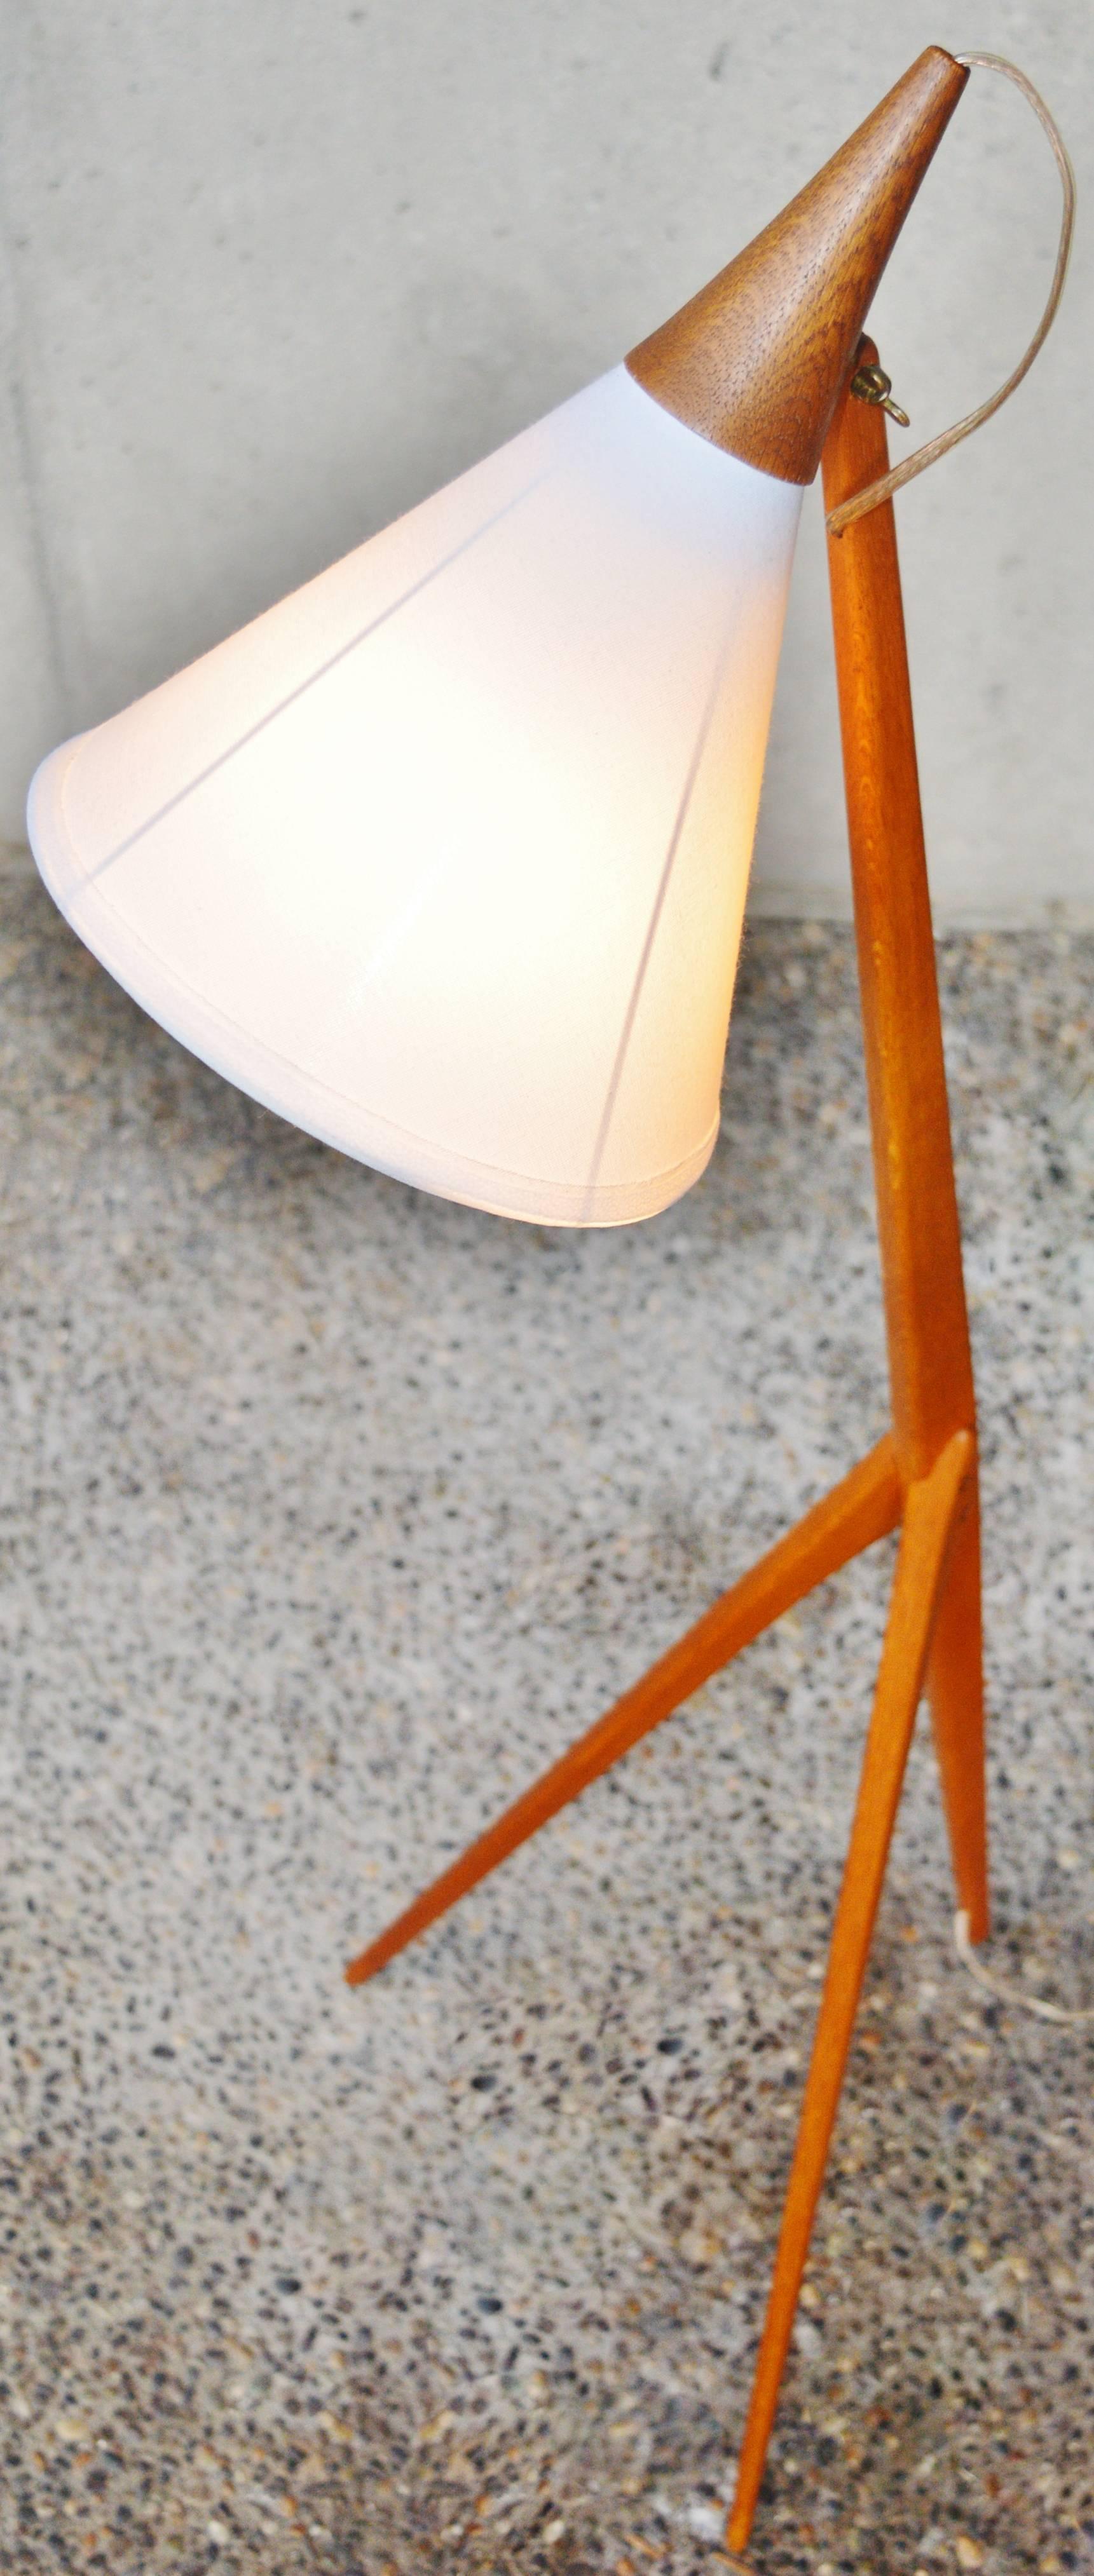 This gorgeous stand out Danish modern teak tripod lamp was designed by Uno Kristiansson for Luxus of Sweden in the 1960s. Featuring beautifully contoured teak legs that meld into the main stem. The teak conical cap becomes an extension of the new